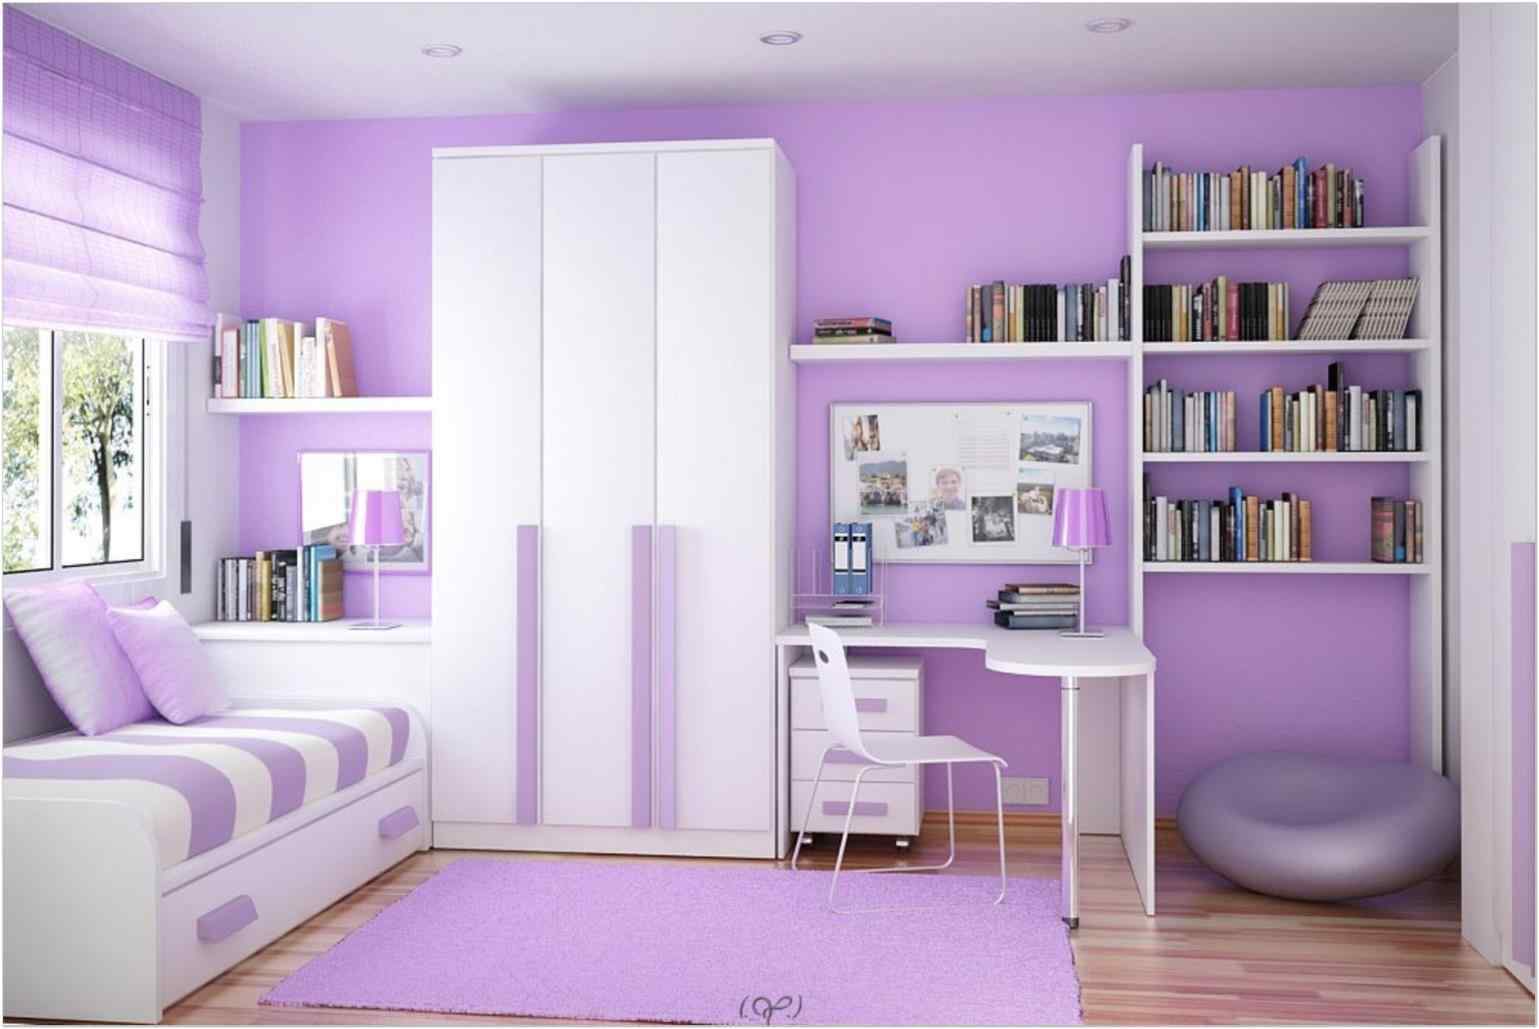 Wallpaper For Teenager Room Wallpapers For Teenage - Colour Purple In Room , HD Wallpaper & Backgrounds